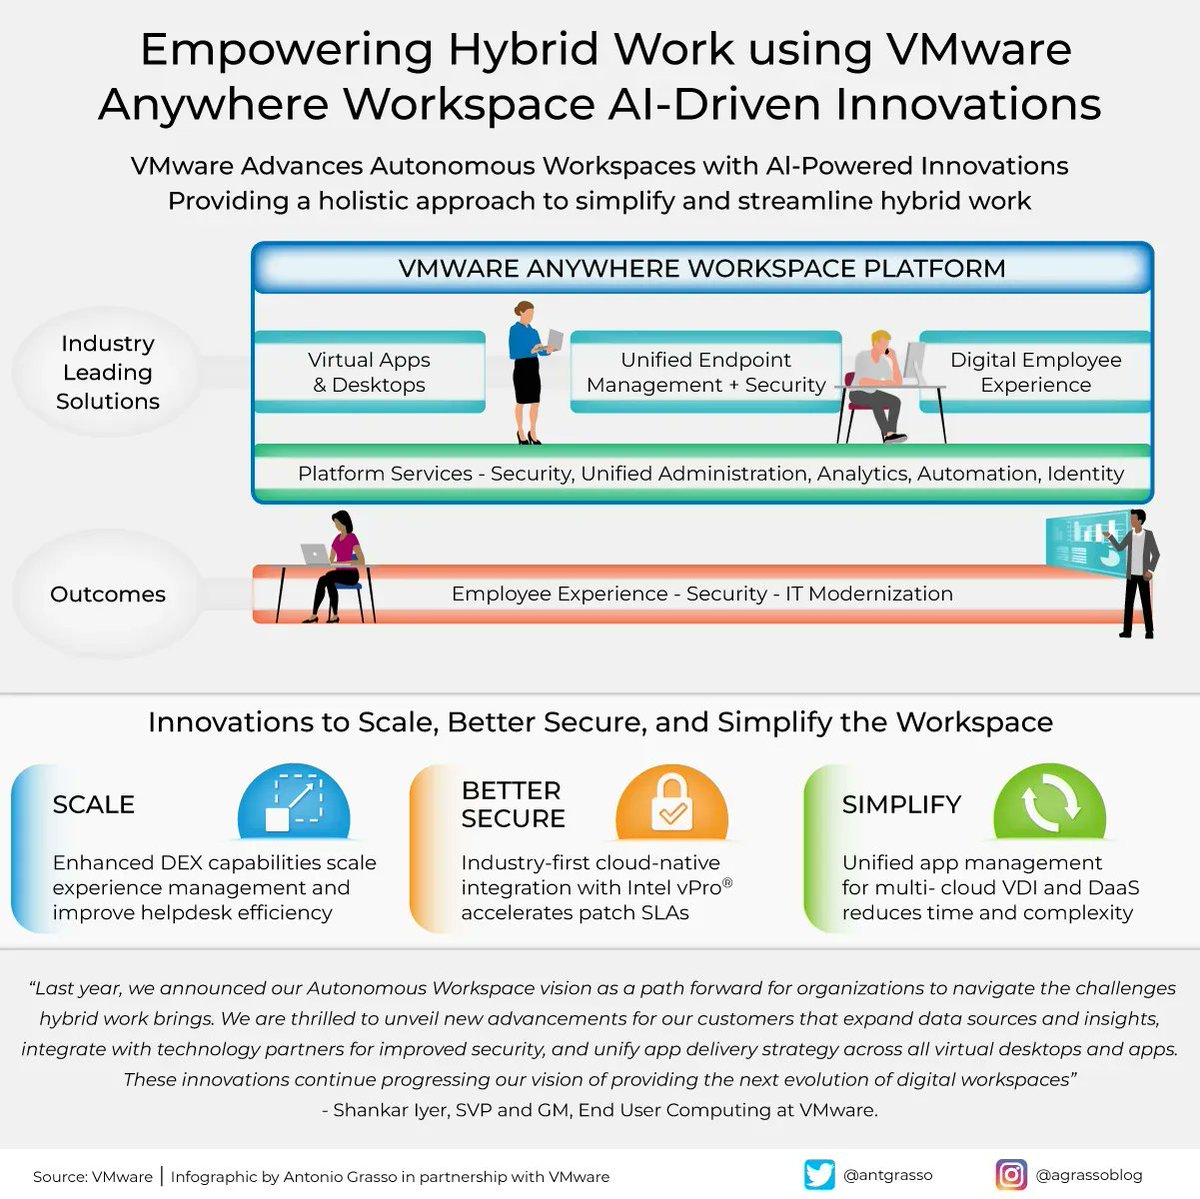 VMware's AI tie-up with Anywhere Workspace heralds a significant shift in hybrid work tech. Enhancing user experience, streamlining apps, and fortifying security showcases innovation and efficiency.

More > bit.ly/3L0sxCT

Paid partnership with @VMware #VMwareEvangelist